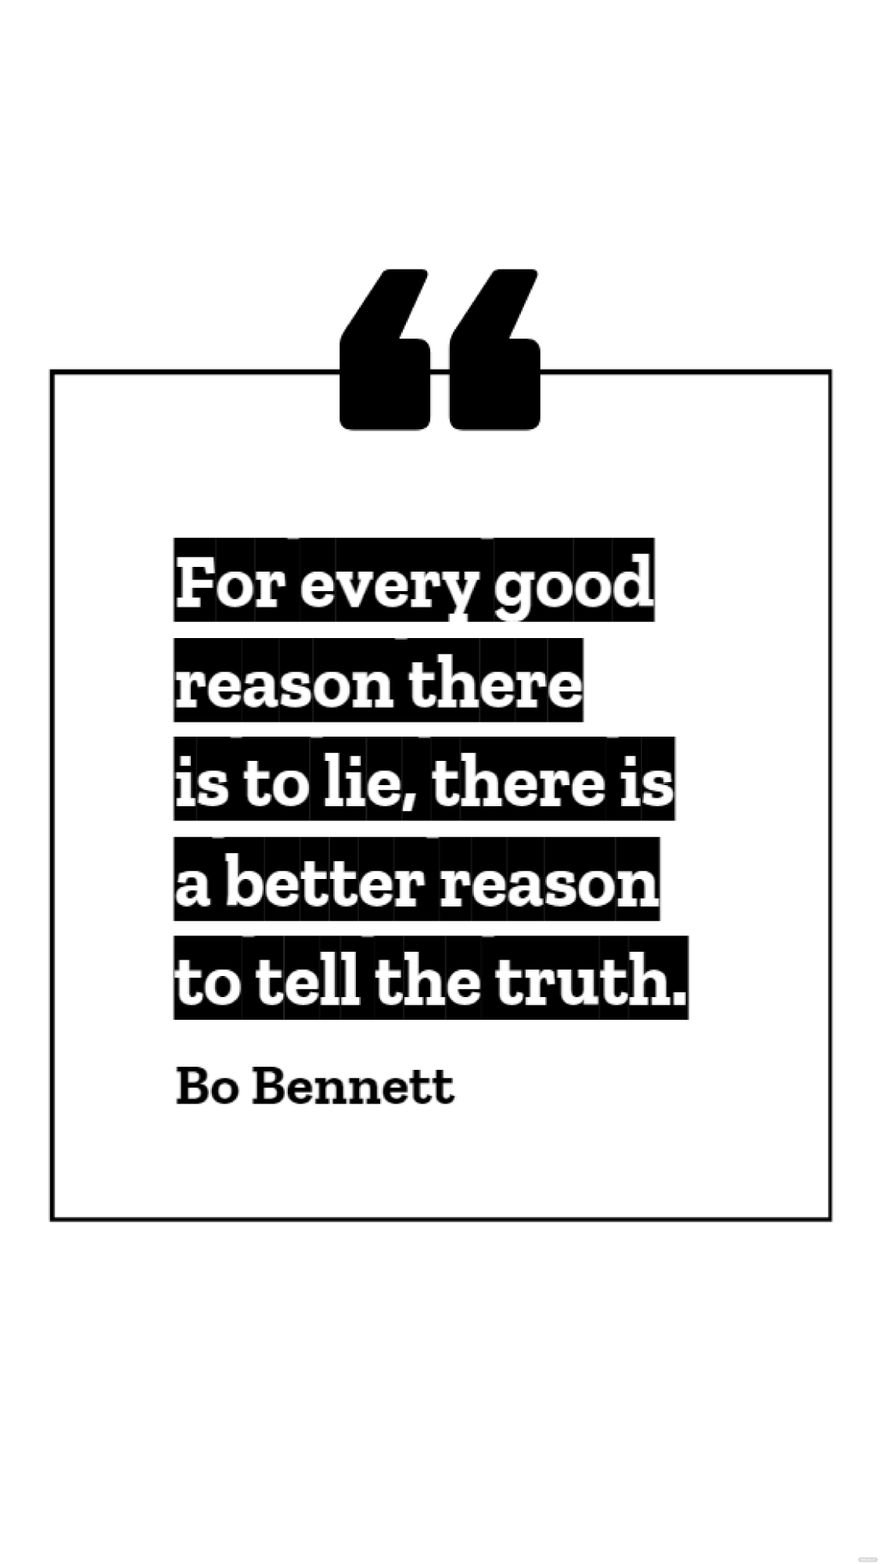 Bo Bennett - For every good reason there is to lie, there is a better reason to tell the truth.